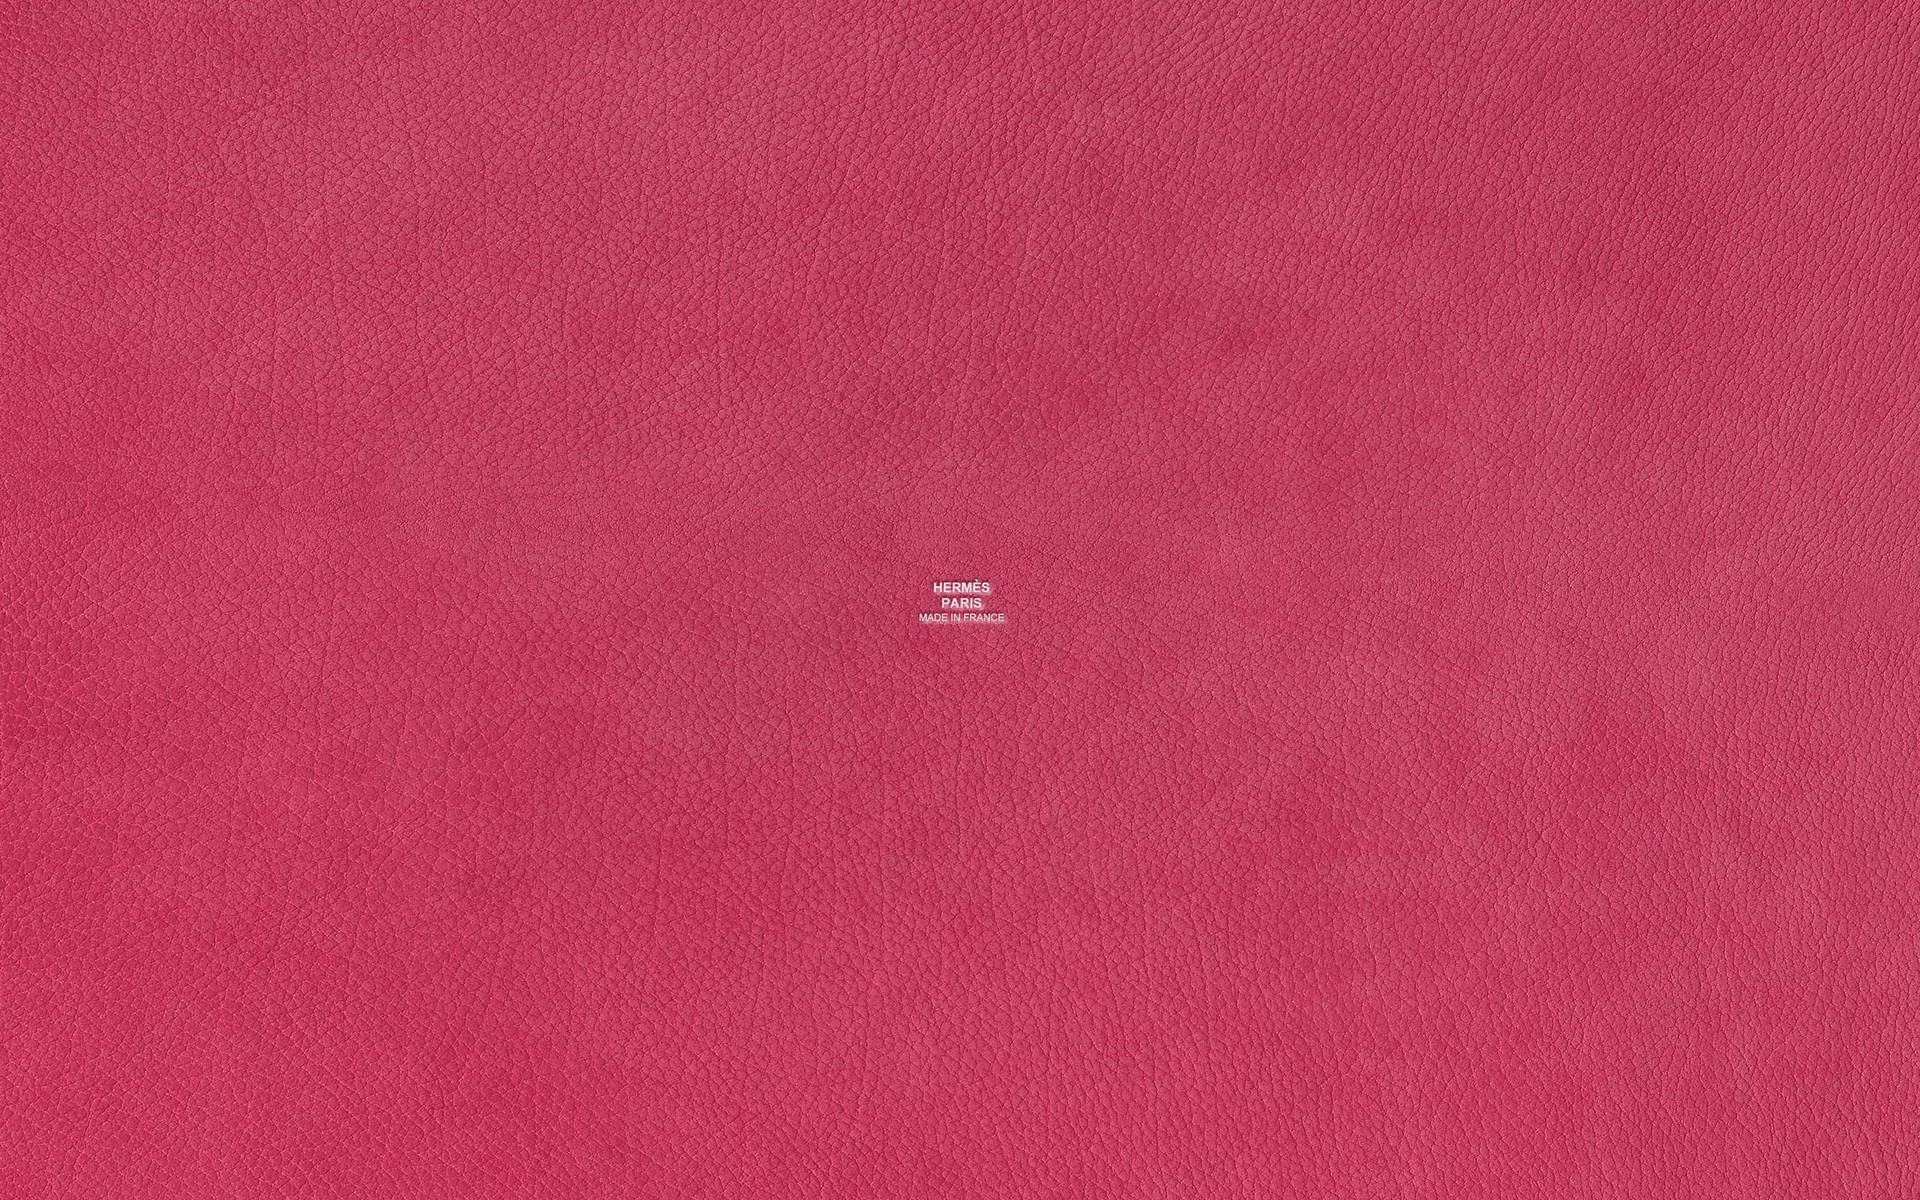 Bright Pink Textured Hermes Leather Background